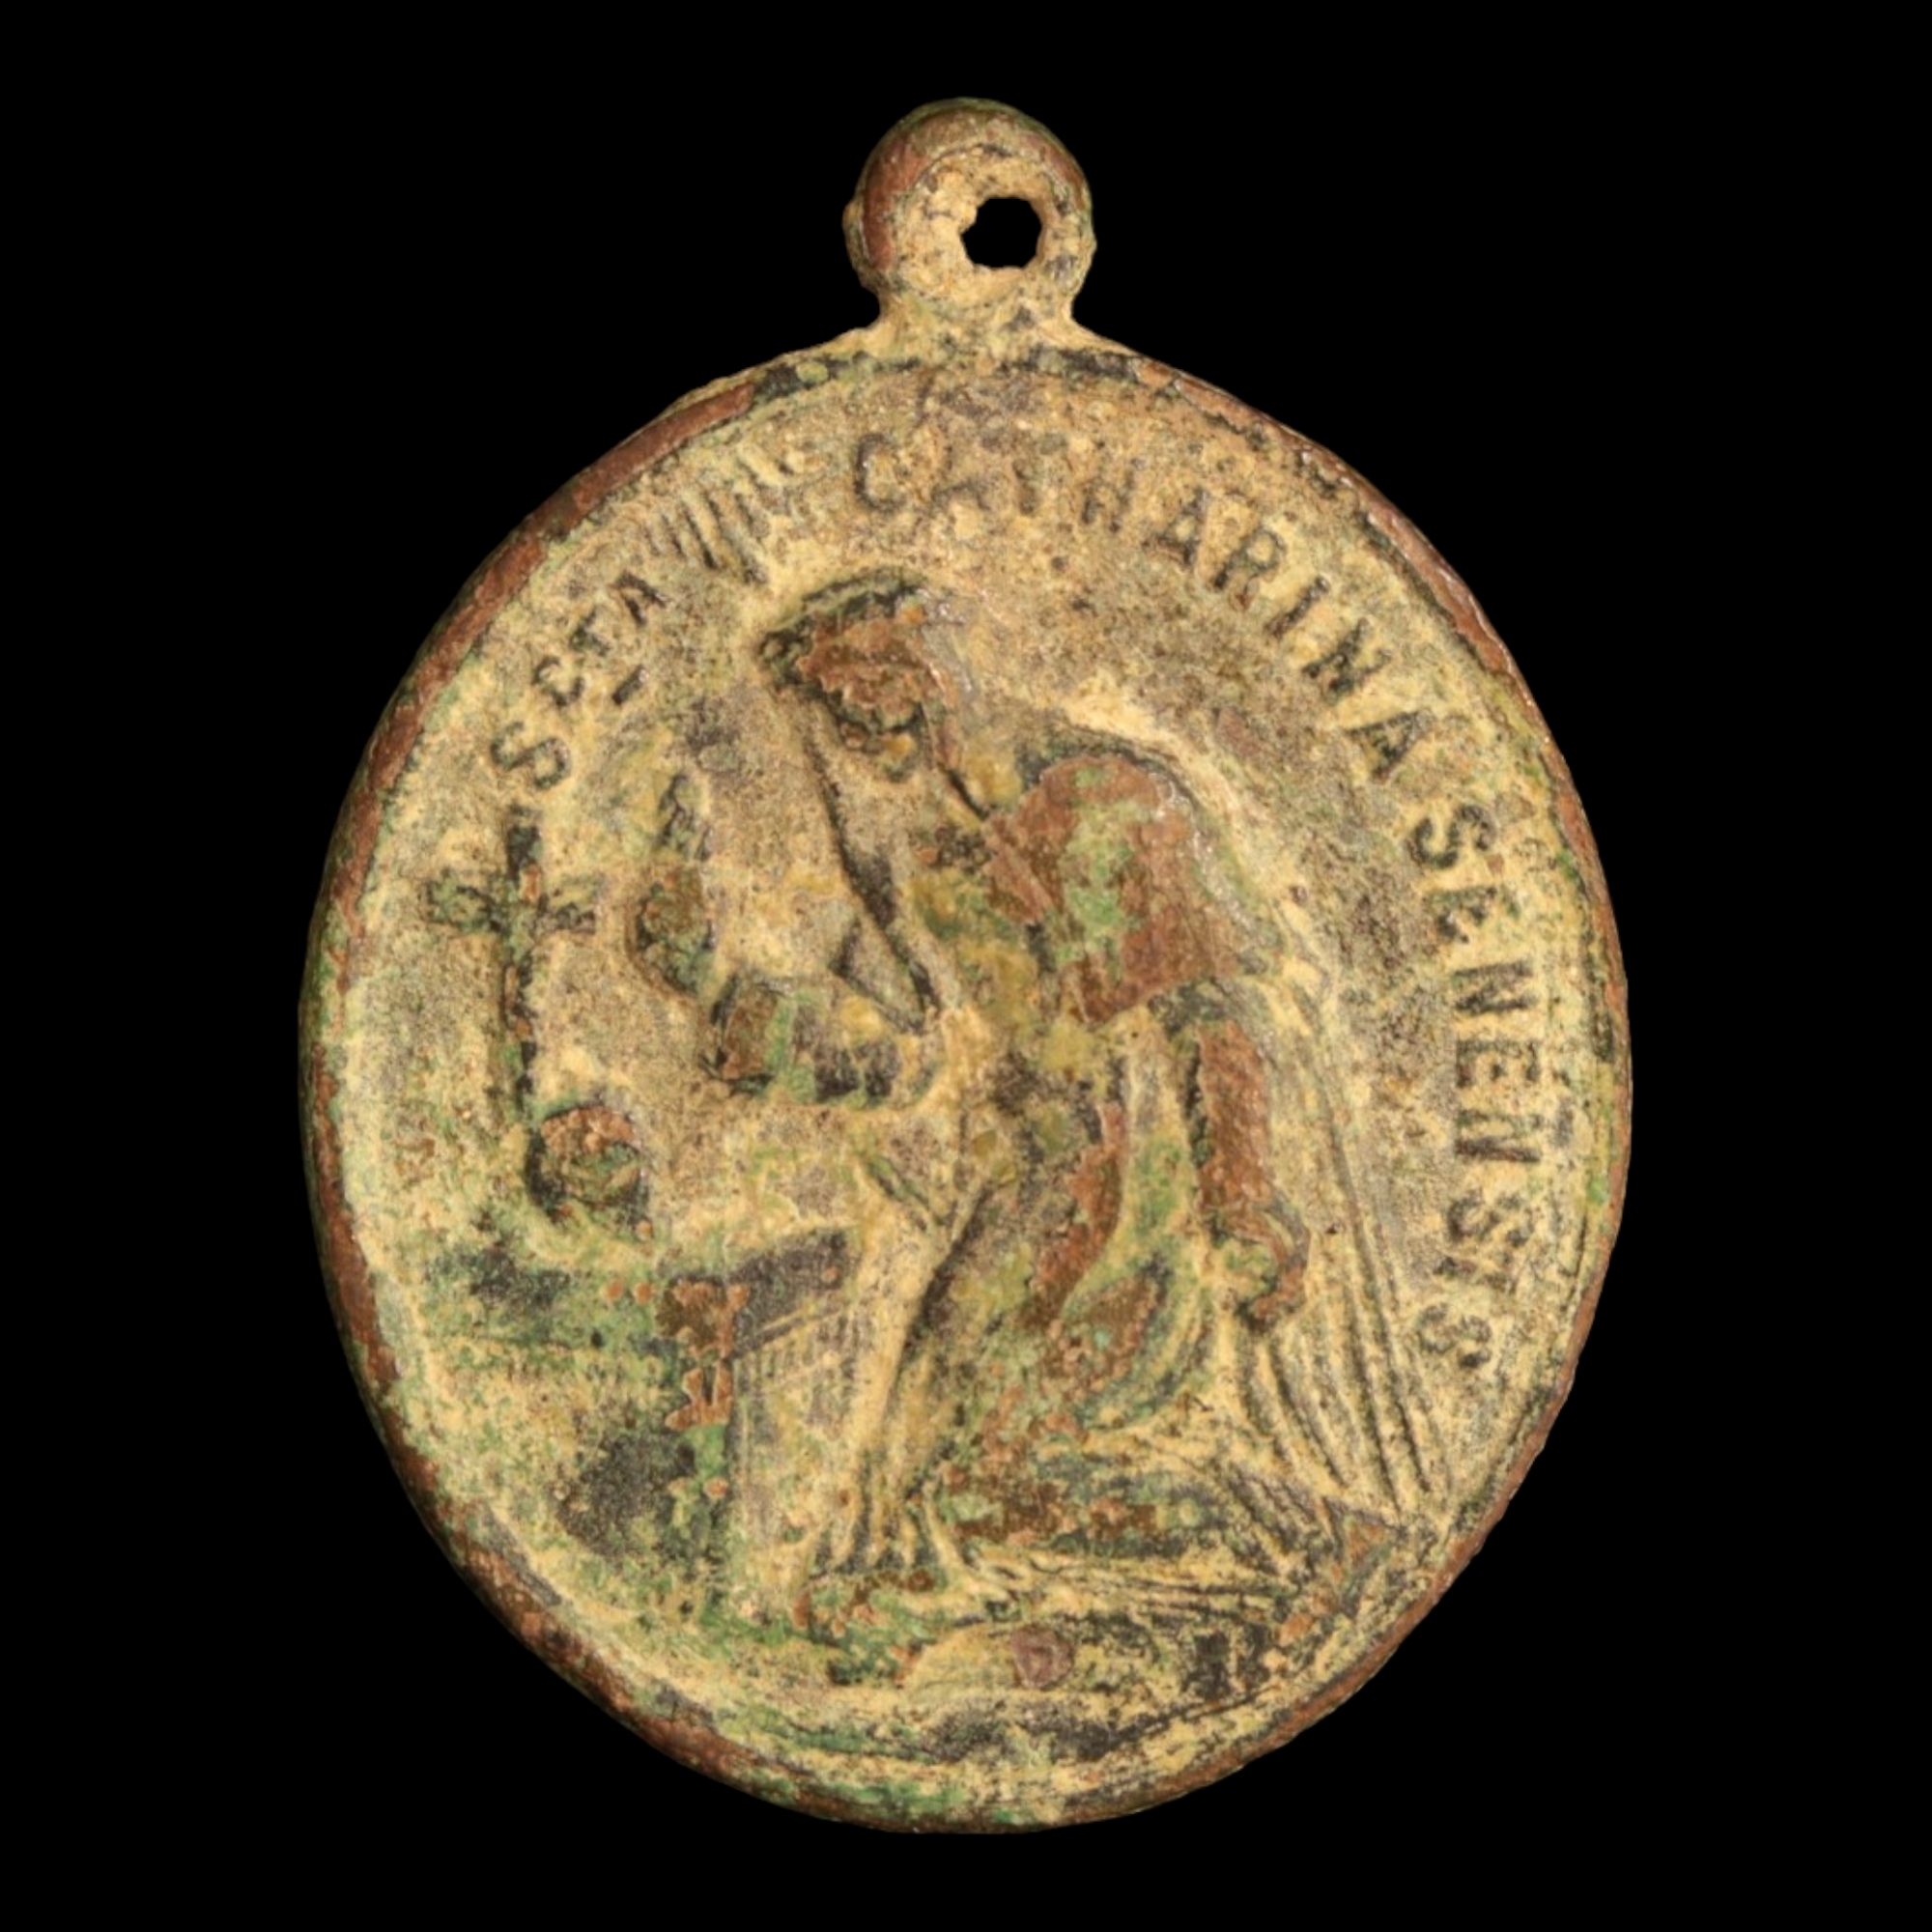 Religious Medal, Catholic Church, St. Catherine of Siena, 36mm - 1500s to 1700s - Spanish Empire